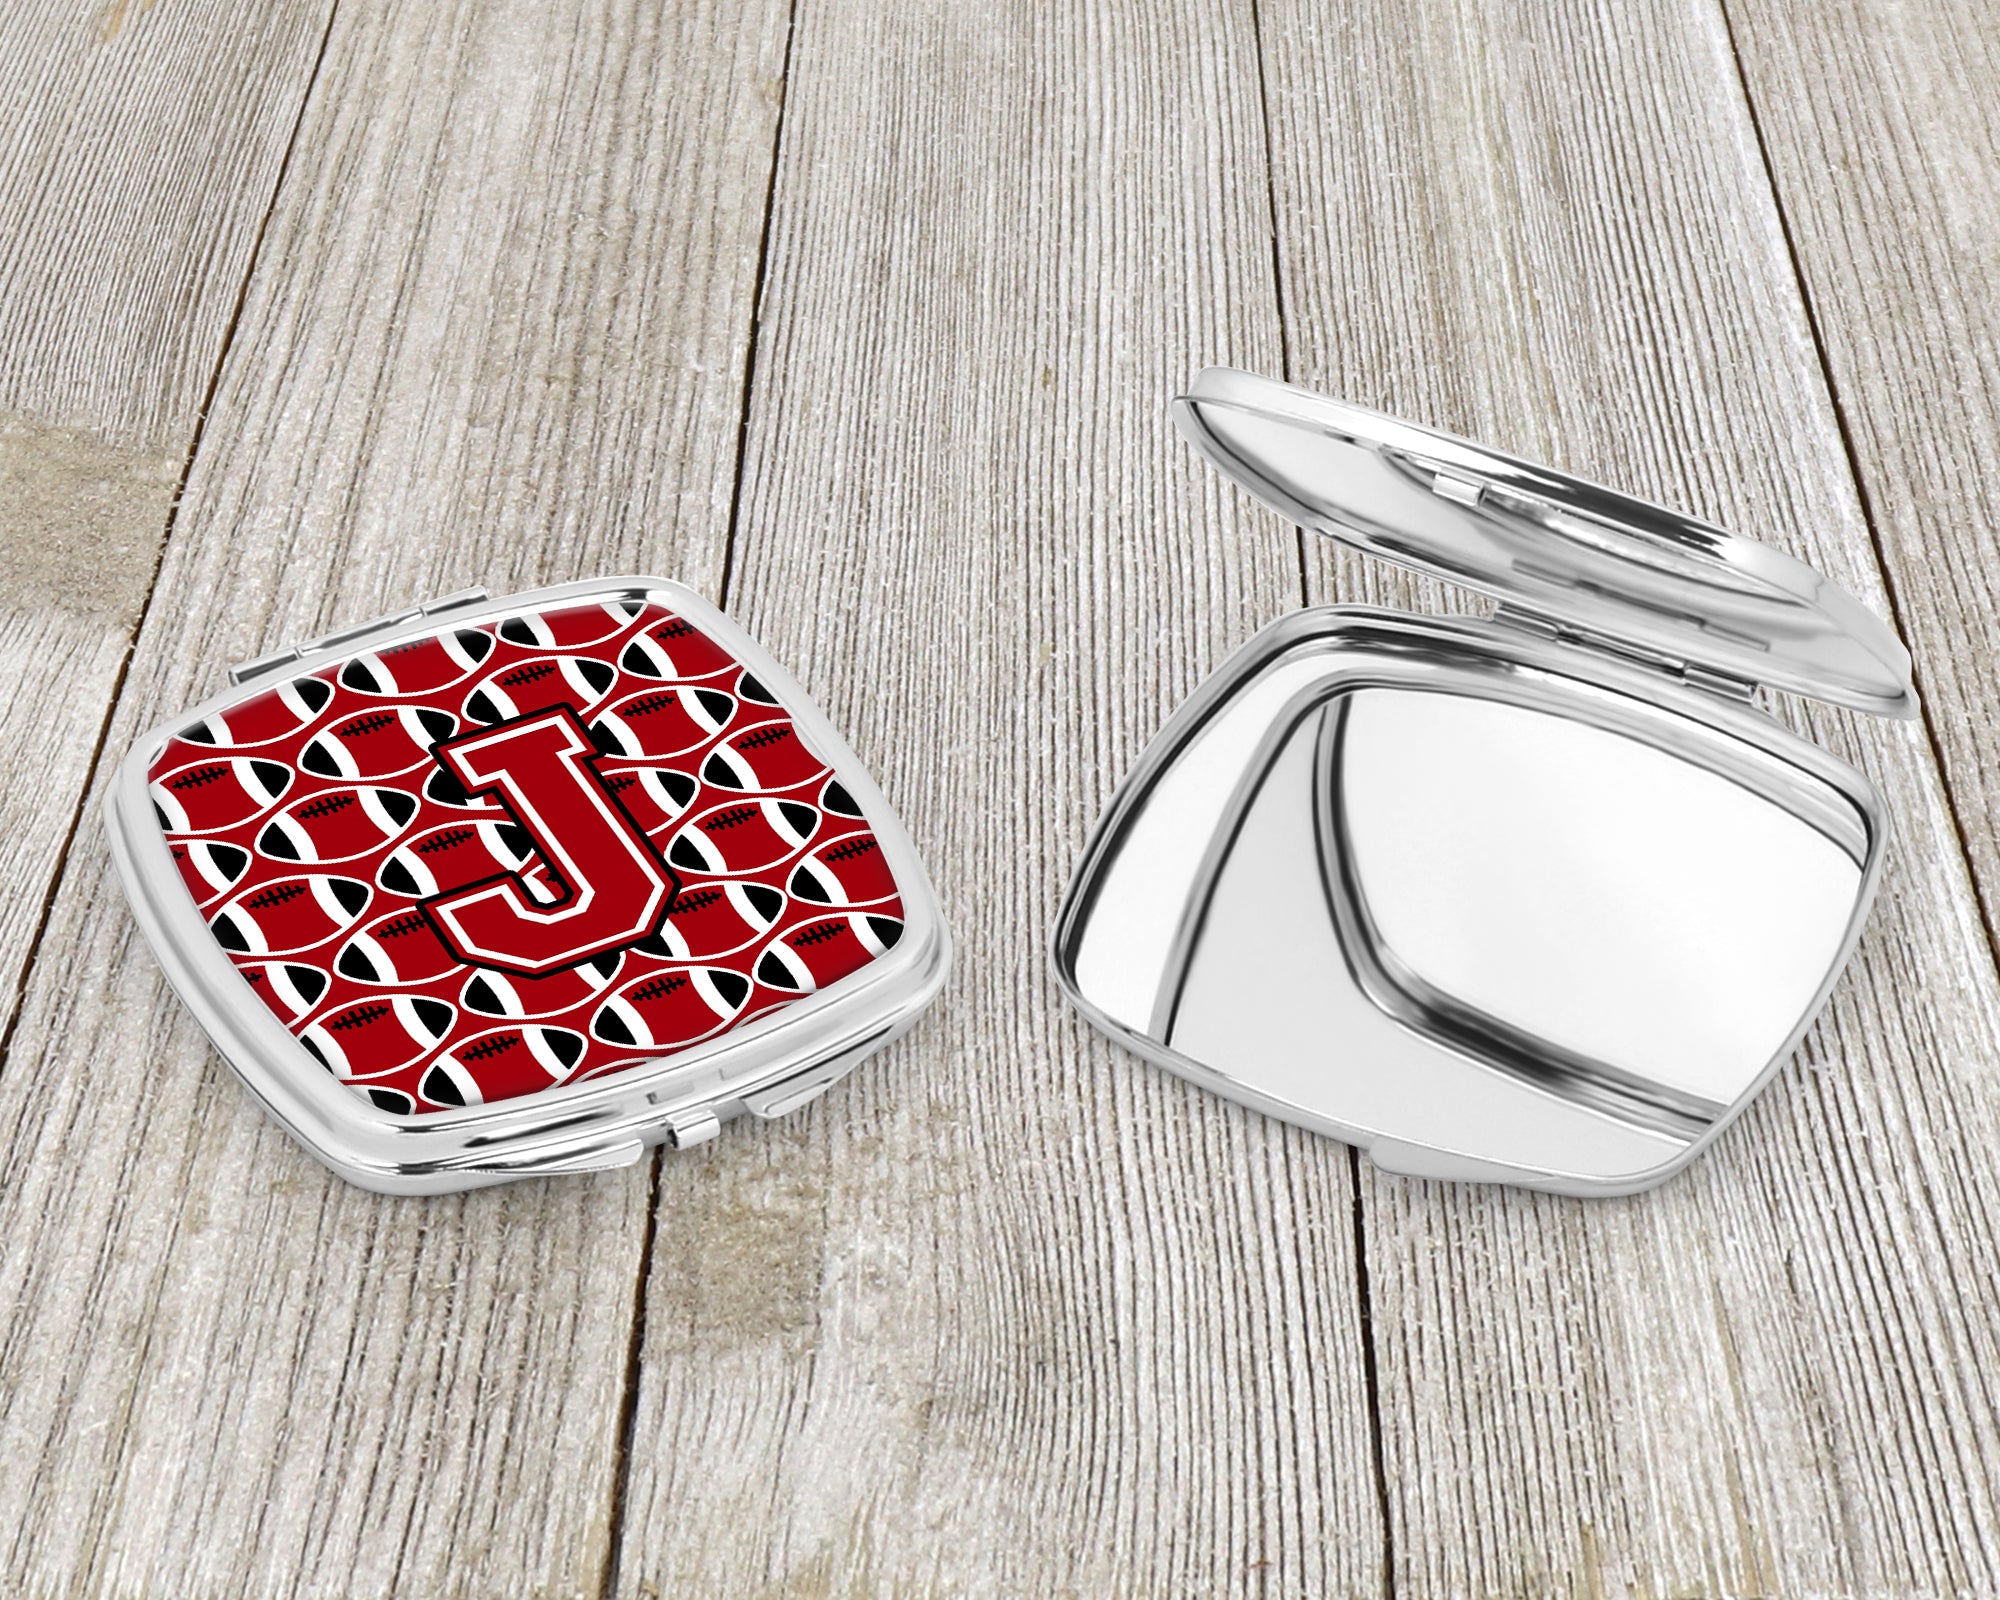 Letter J Football Red, Black and White Compact Mirror CJ1073-JSCM